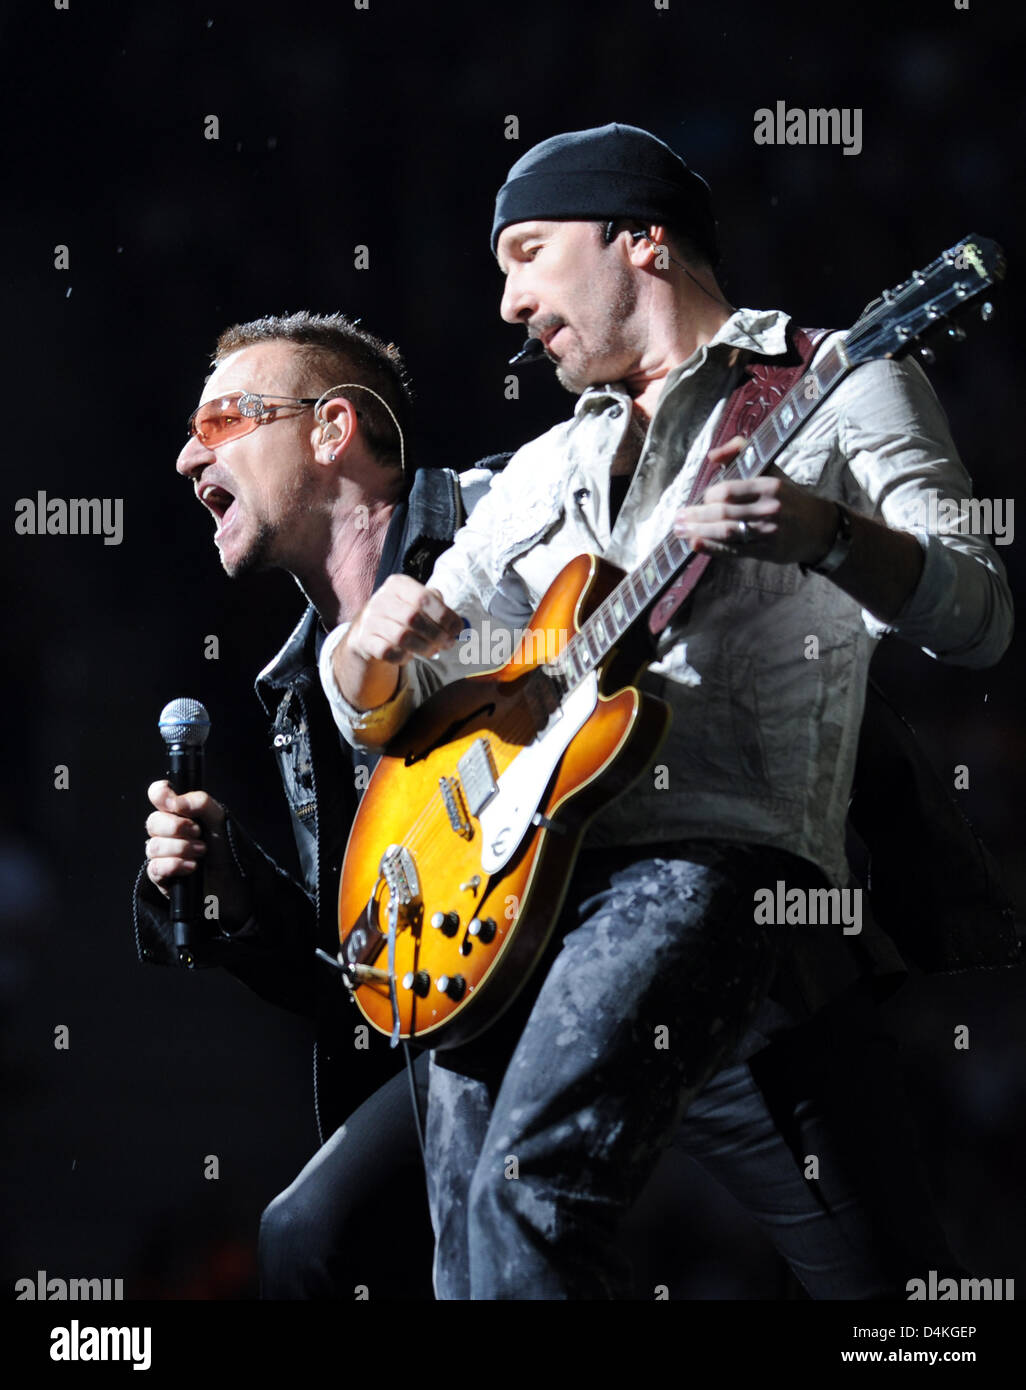 Bono (L), singer of Irish rock band U2, and guitarist ?The Edge? perform on stage during the first of two Germany concerts at the Olympic Stadium in Berlin, Germany, 18 July 2009. According to the organisers 90.000 fans flocked to the first concert of the ?360 Grad Tour? (360 degrees tour). Photo: RAINER JENSEN Stock Photo